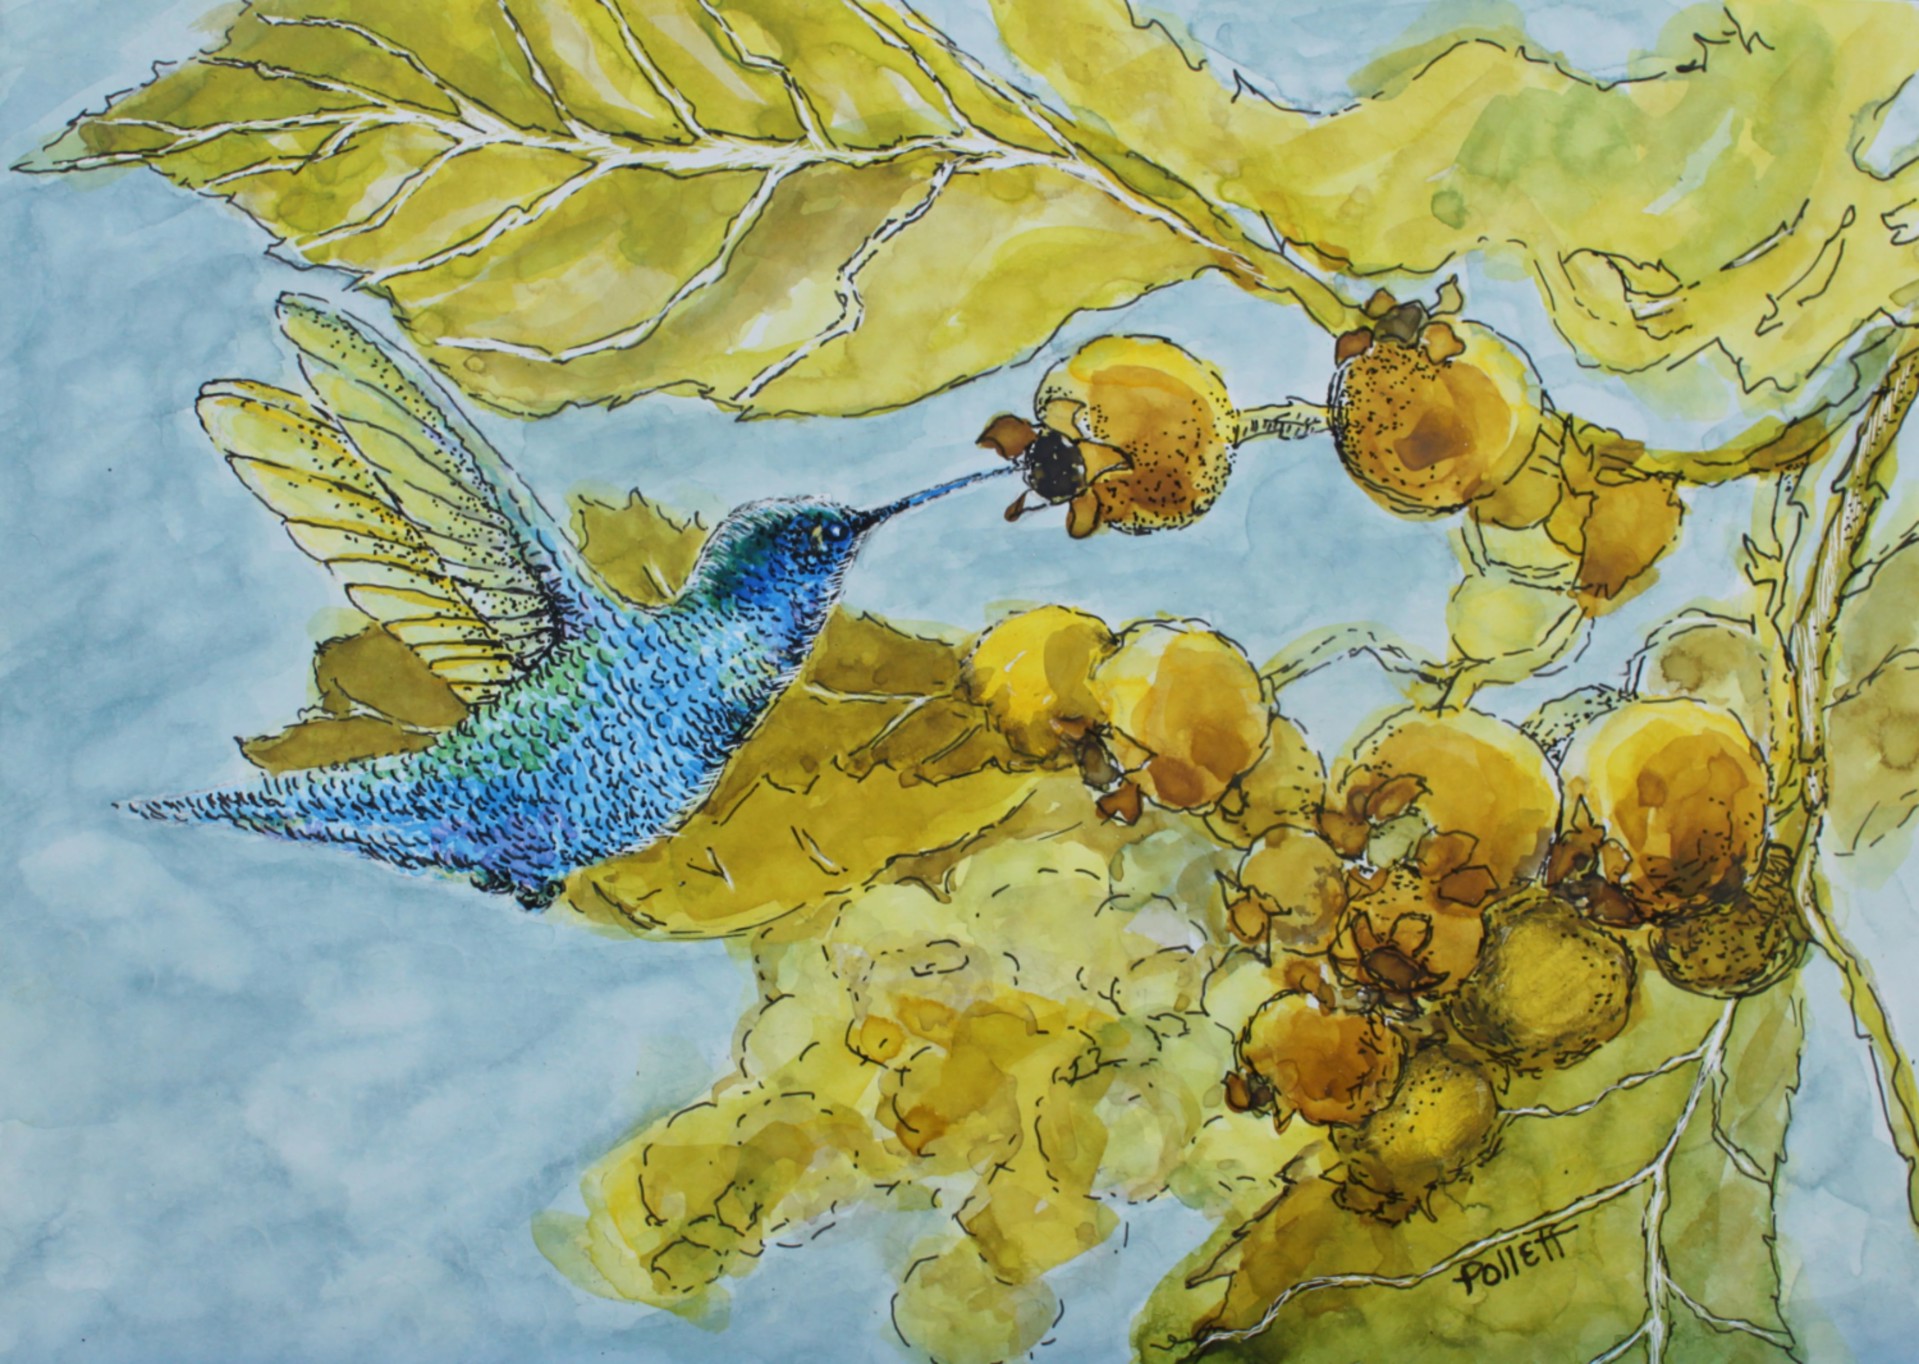 Hummer and Fruit by Cynthia Jewell Pollett